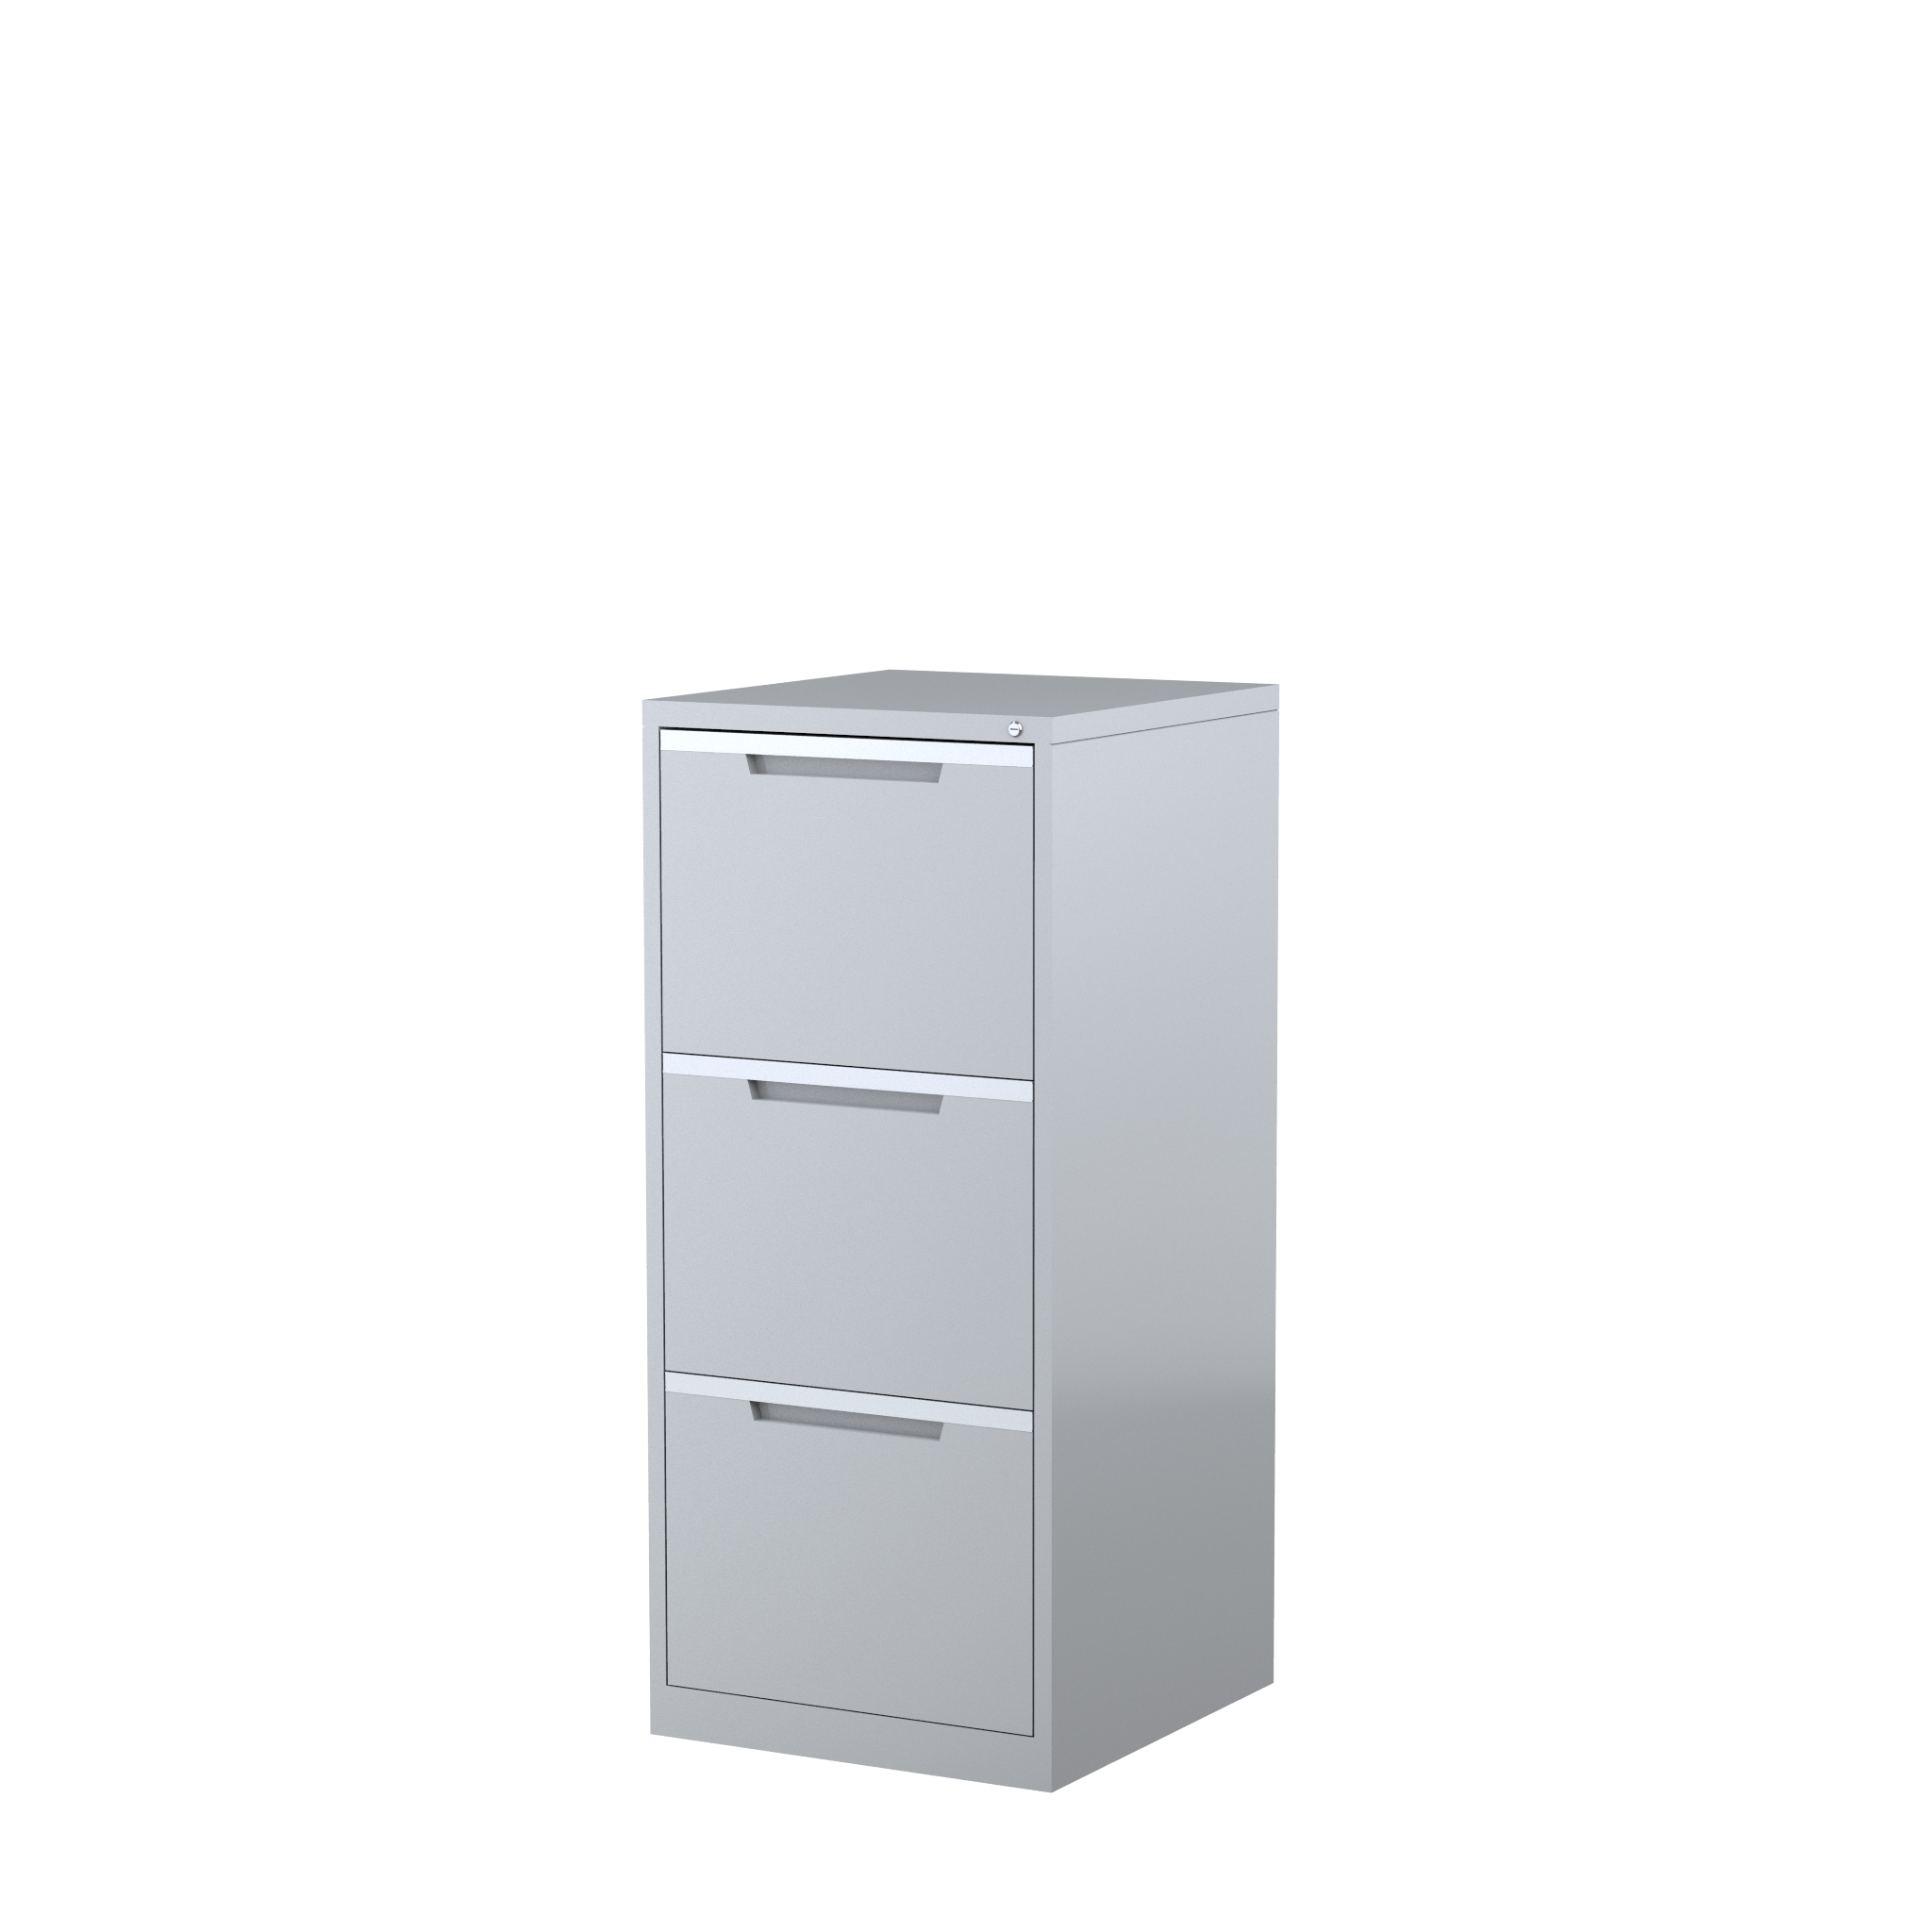 VFA3 - STEELCO A3 - 3 Drawer VFC 1320H x 580W x 620D-SG.png